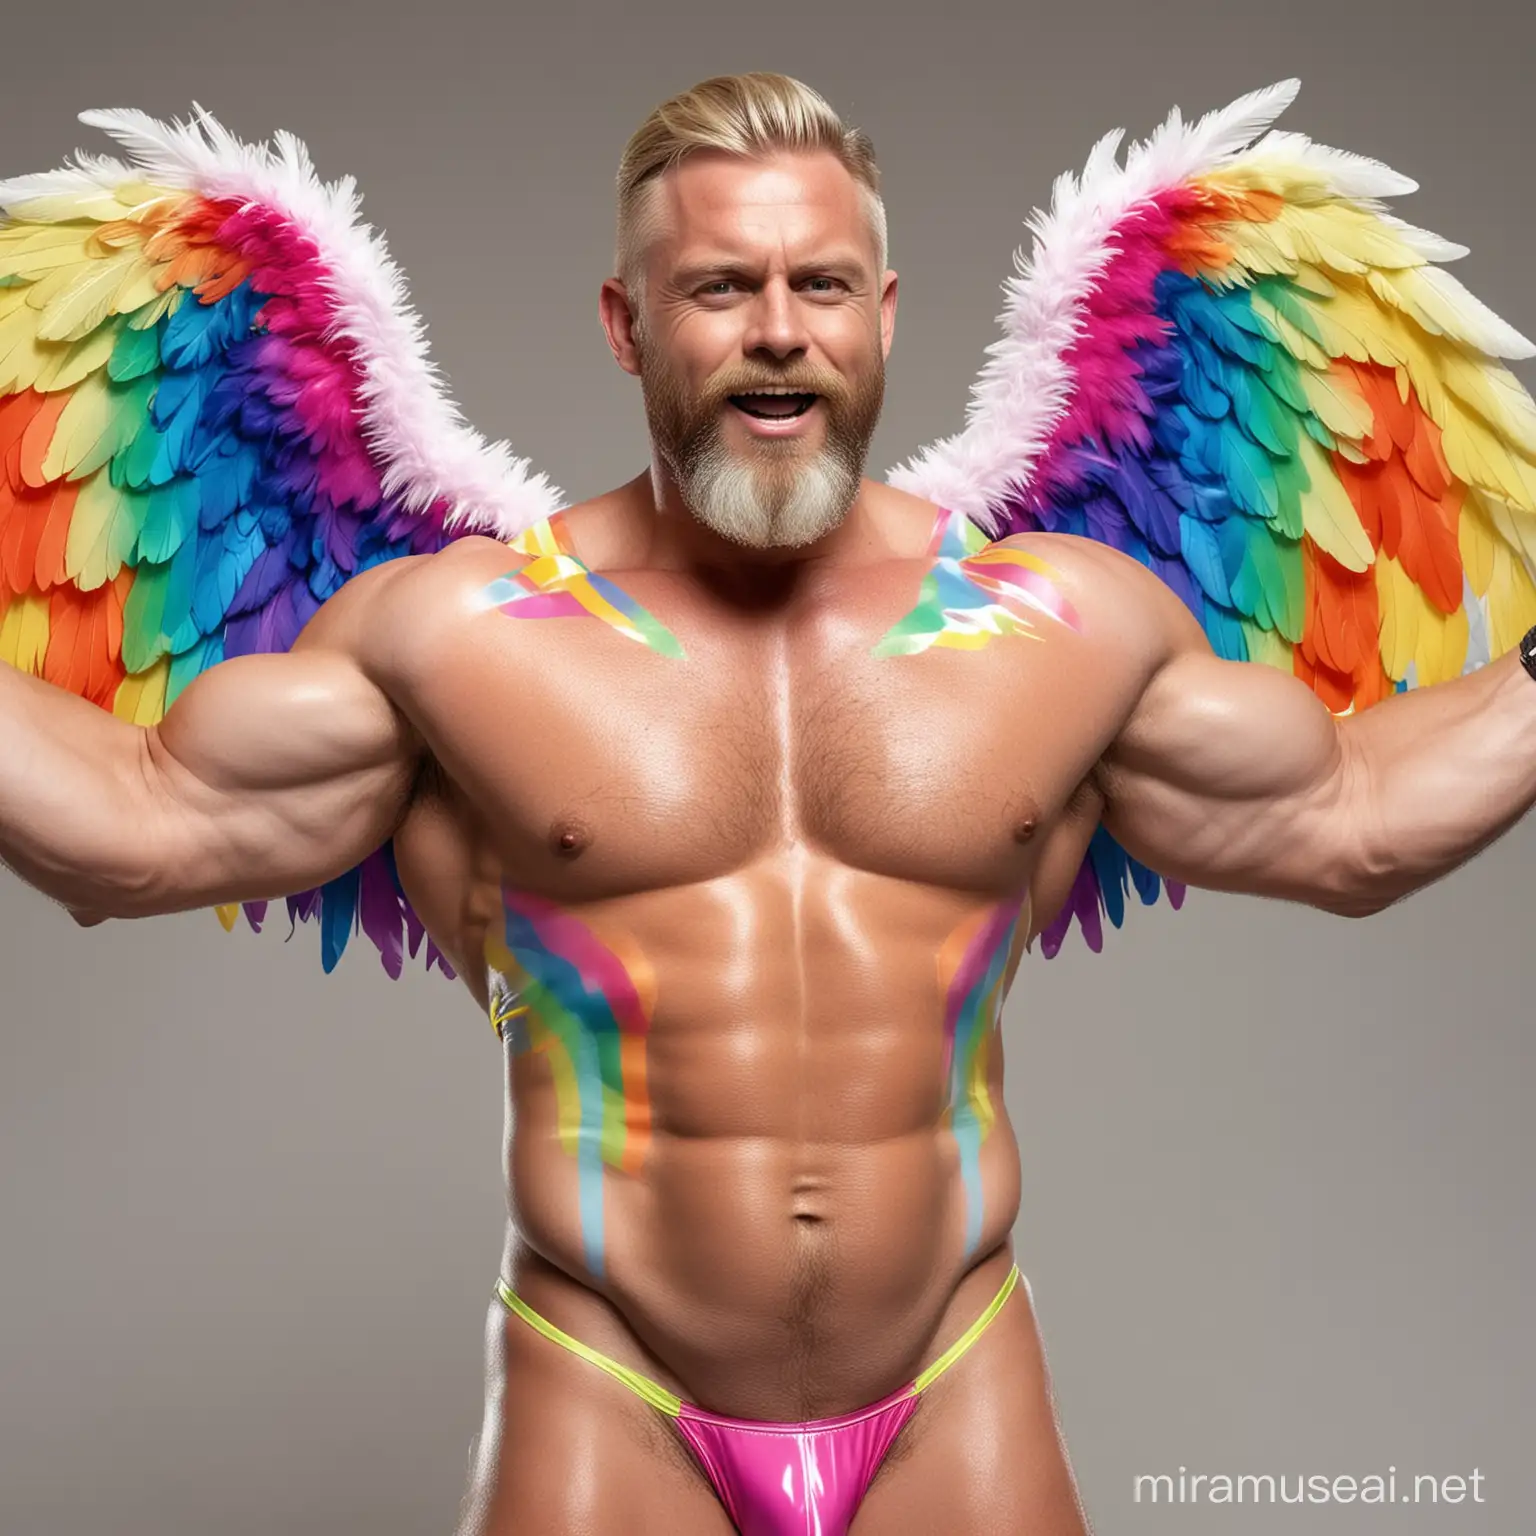 Muscular Bodybuilder Flexing Strong Arm in Vibrant Rainbow Jacket with Eagle Wings